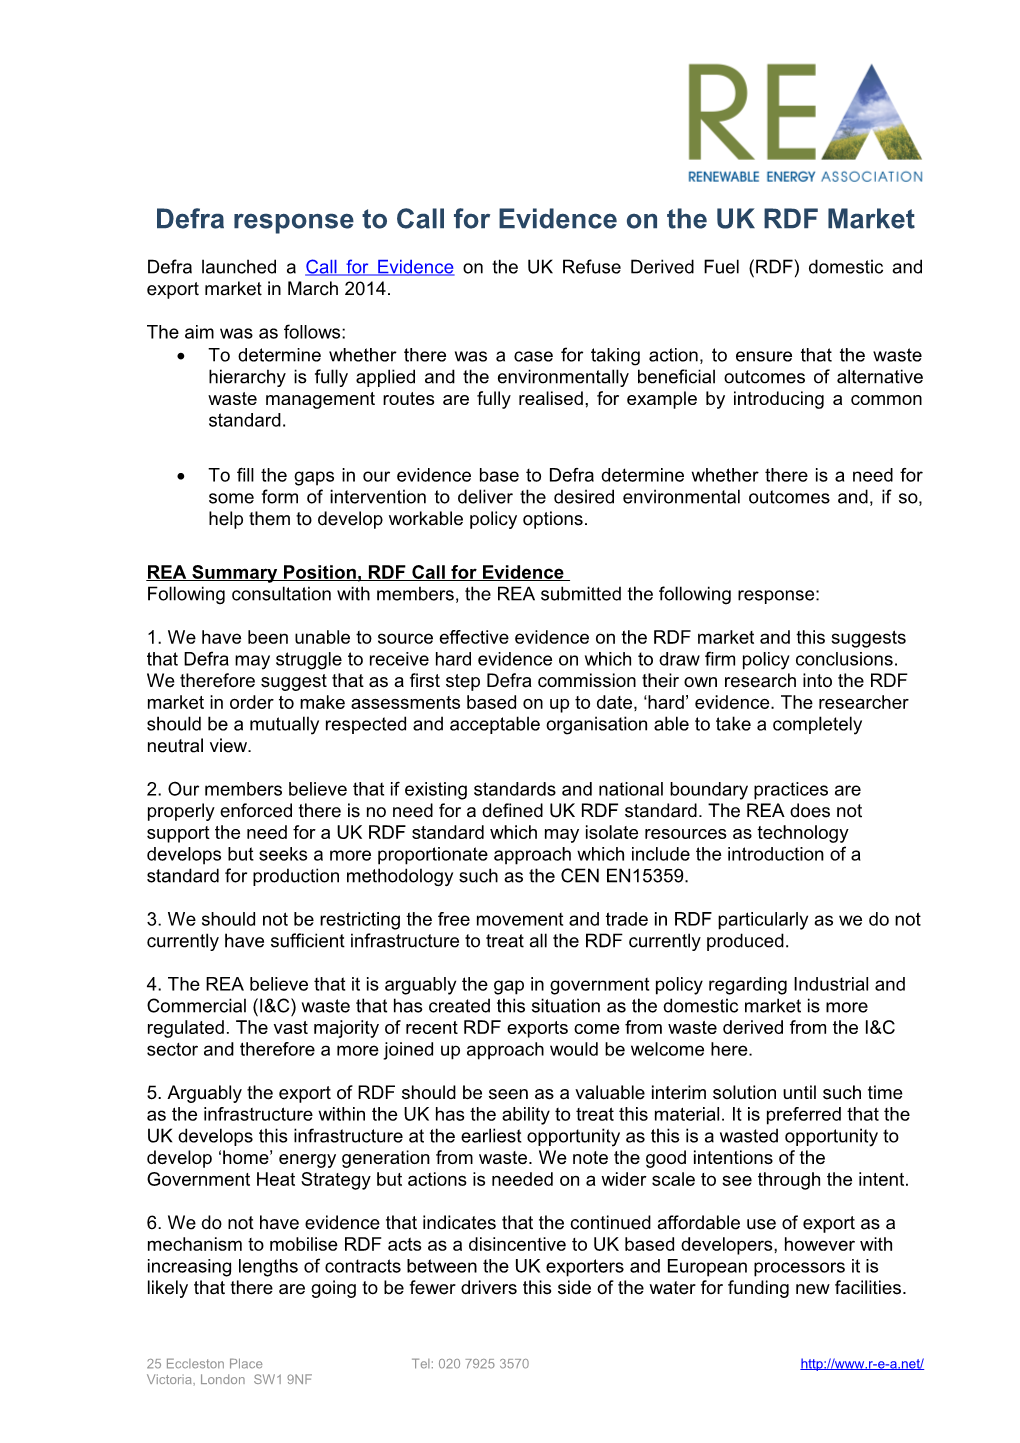 Defra Response to Call for Evidence on the UK RDF Market